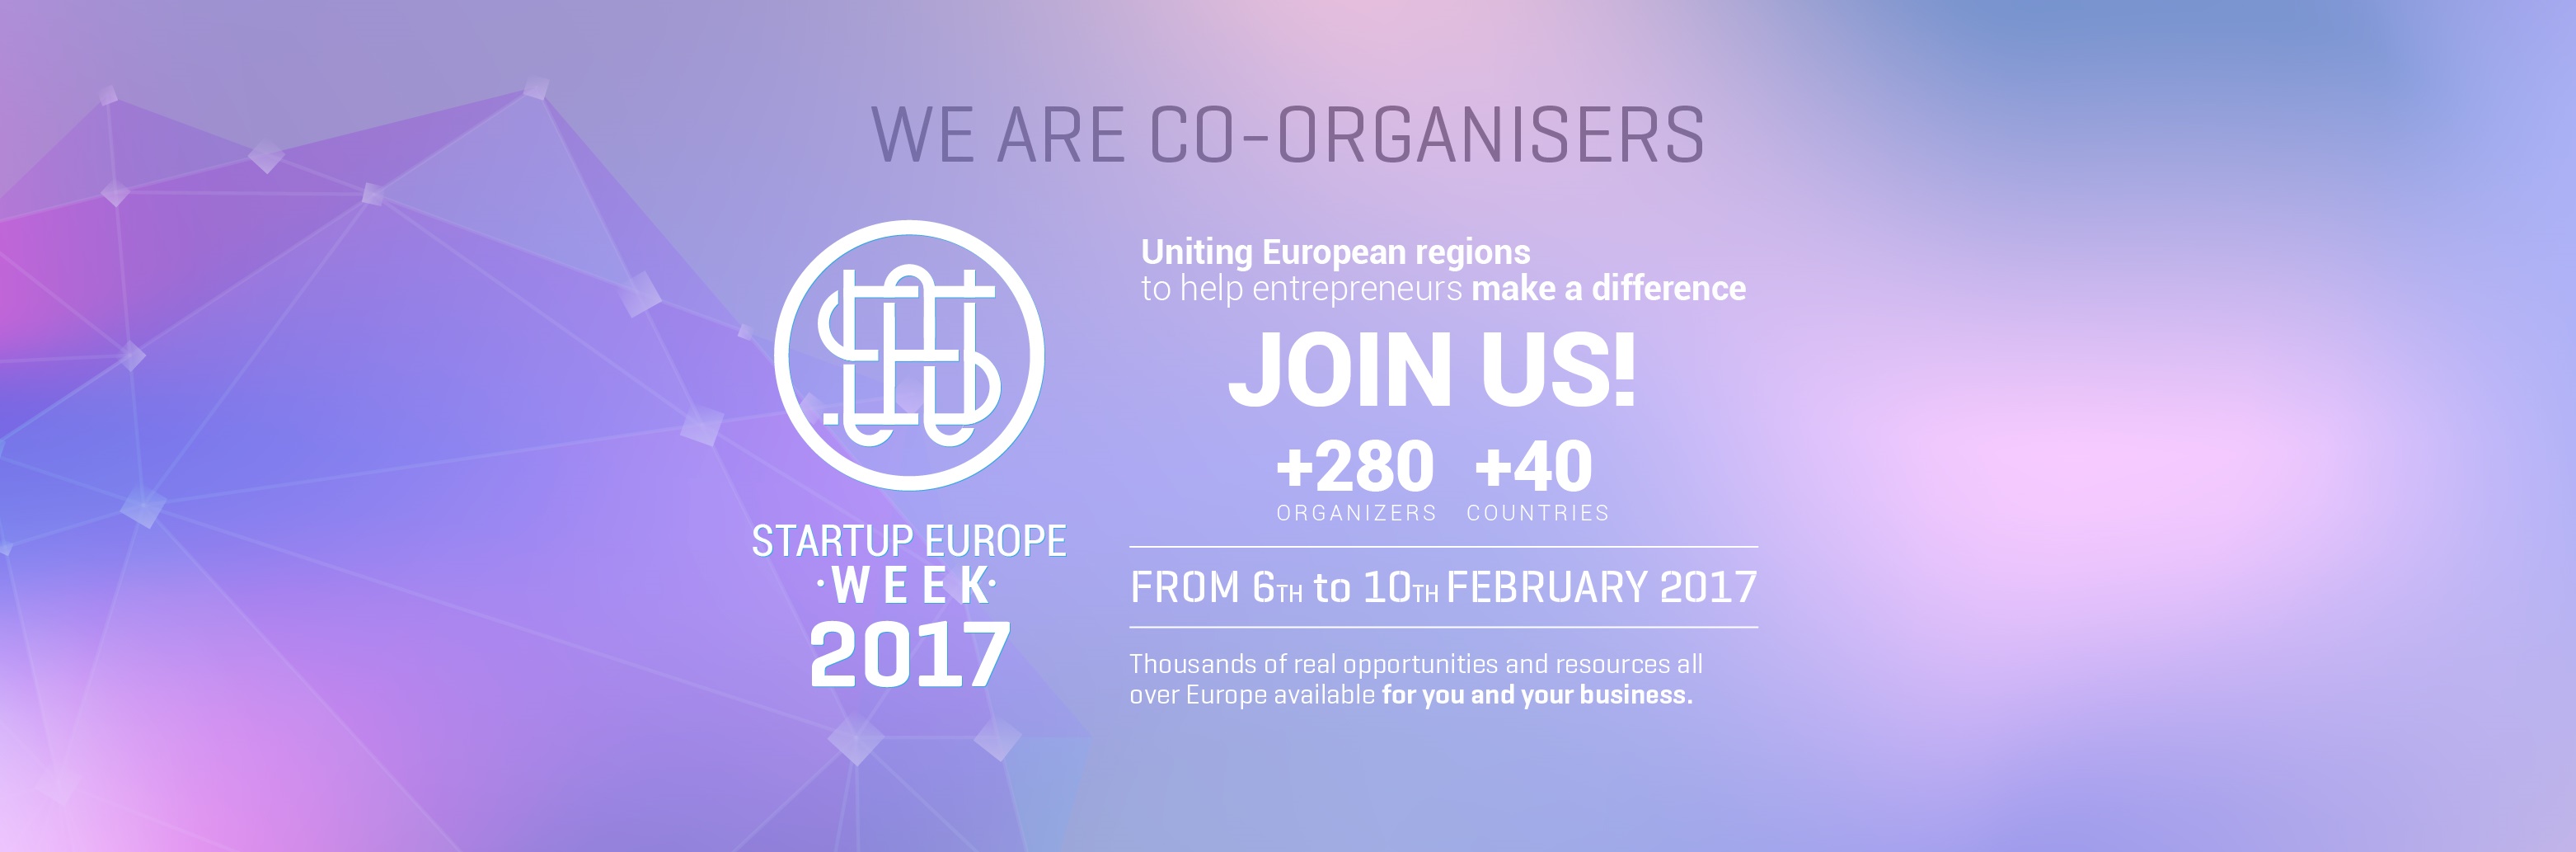 SS_WEEK_2017_organizers_twitter_cover